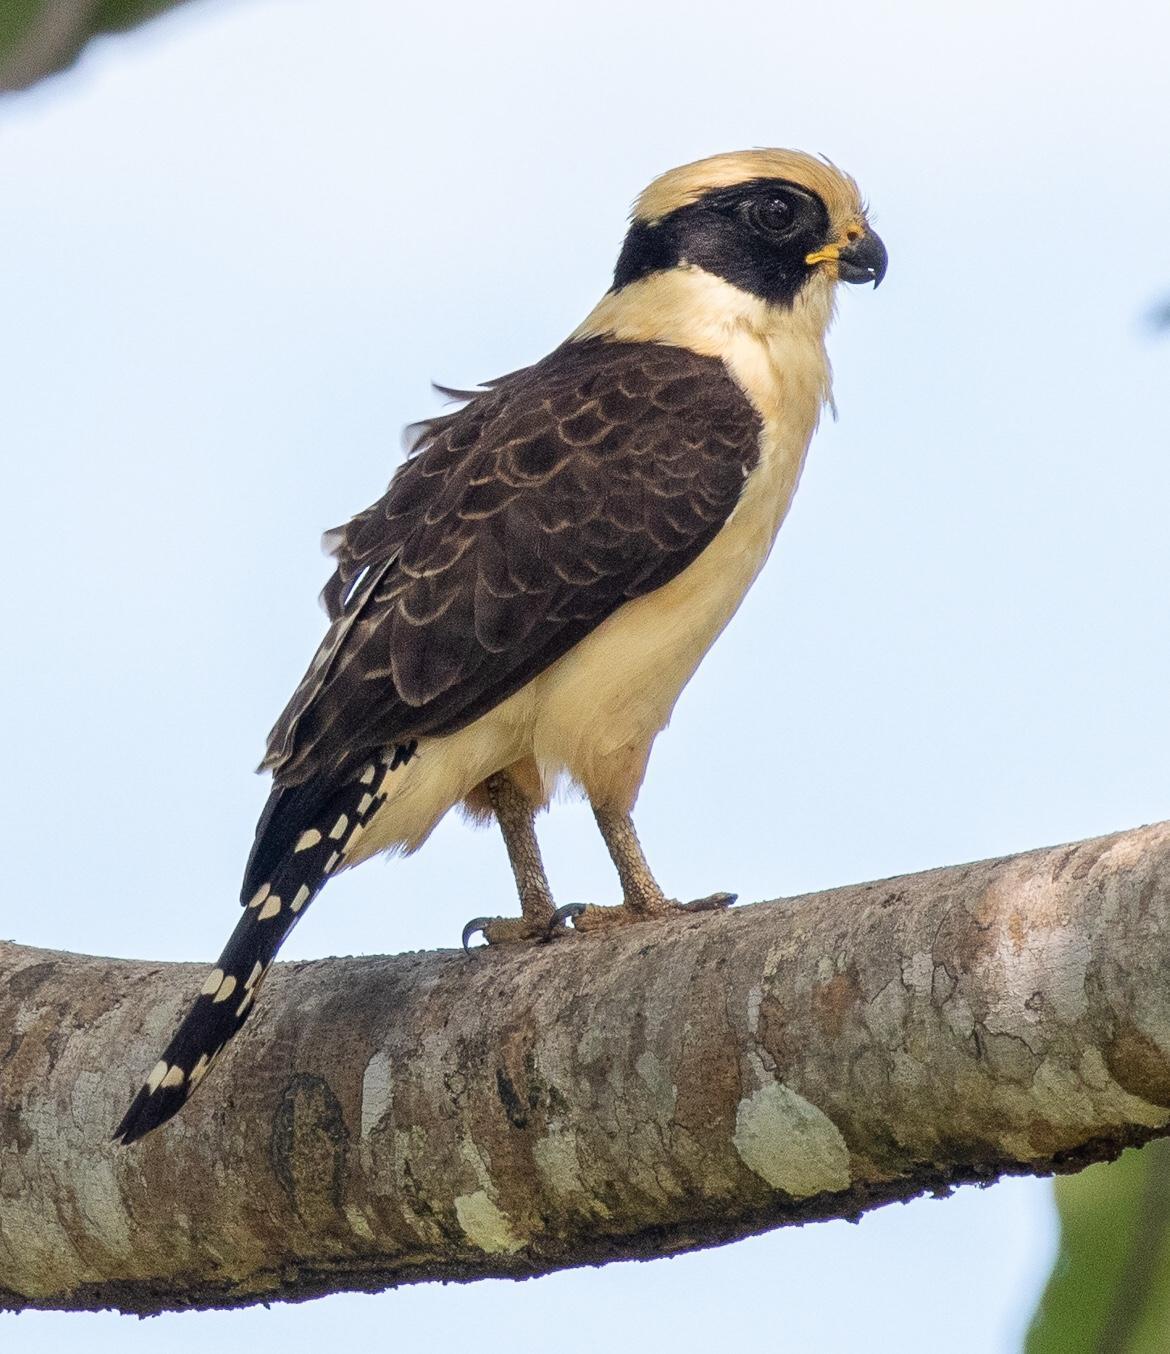 Laughing Falcon Photo by Kate Persons